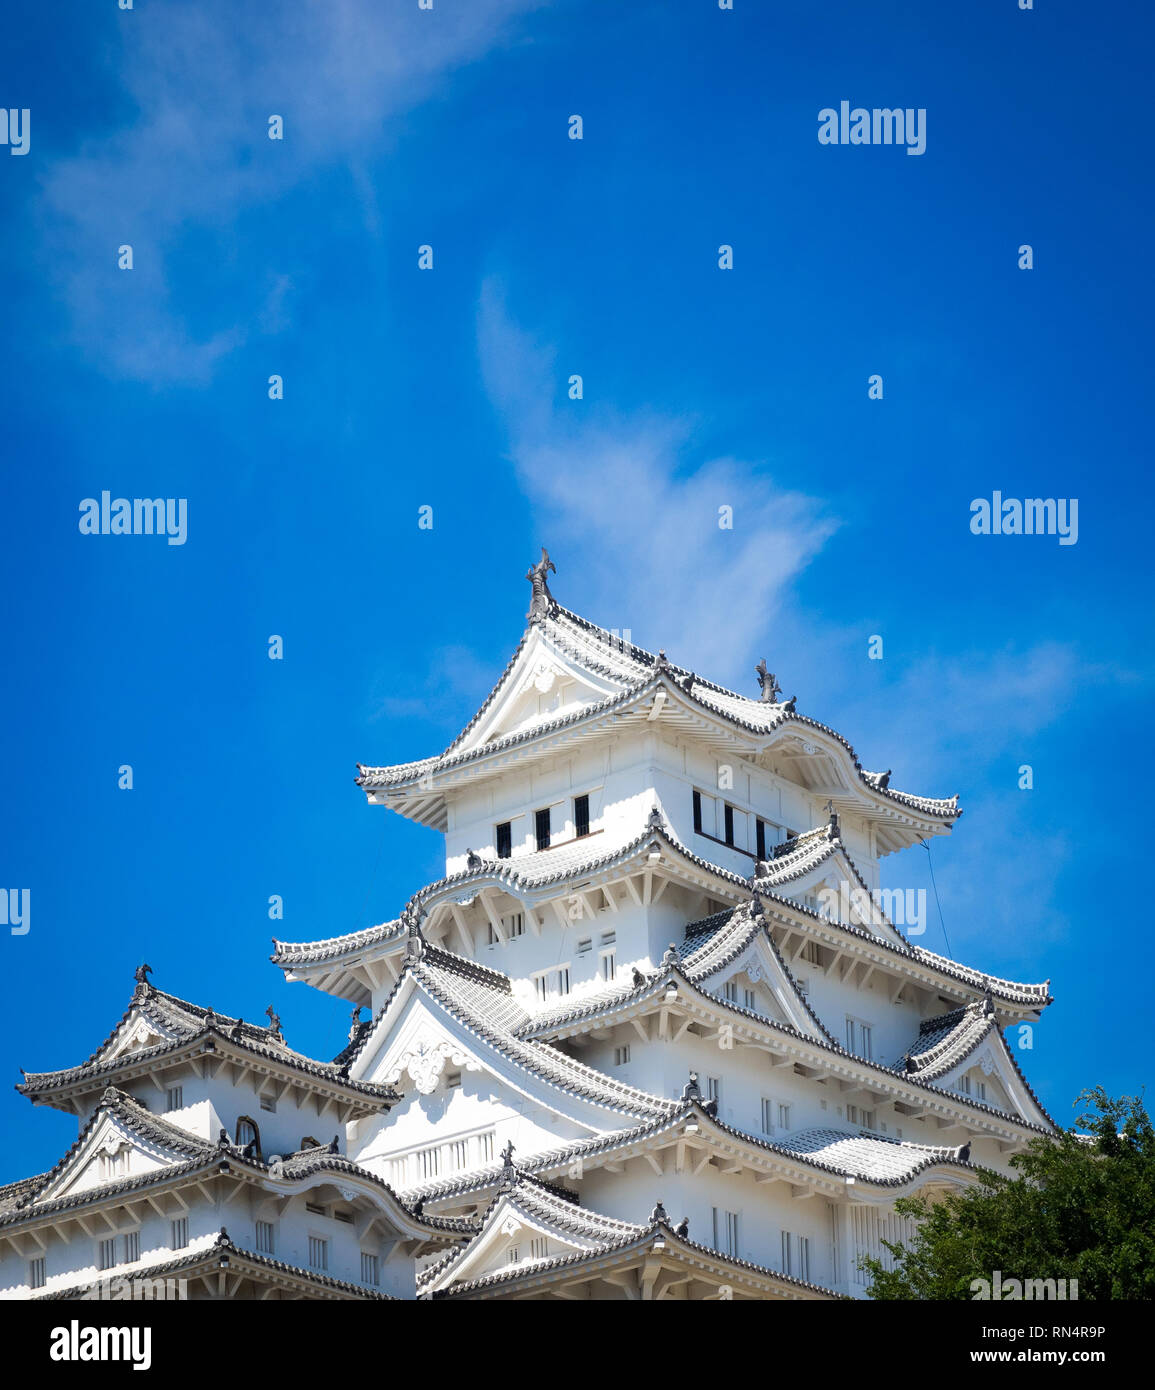 Himeji-jo (Himeji Castle), generally regarded as the finest surviving example of prototypical Japanese castle architecture. Himeji, Japan. Stock Photo